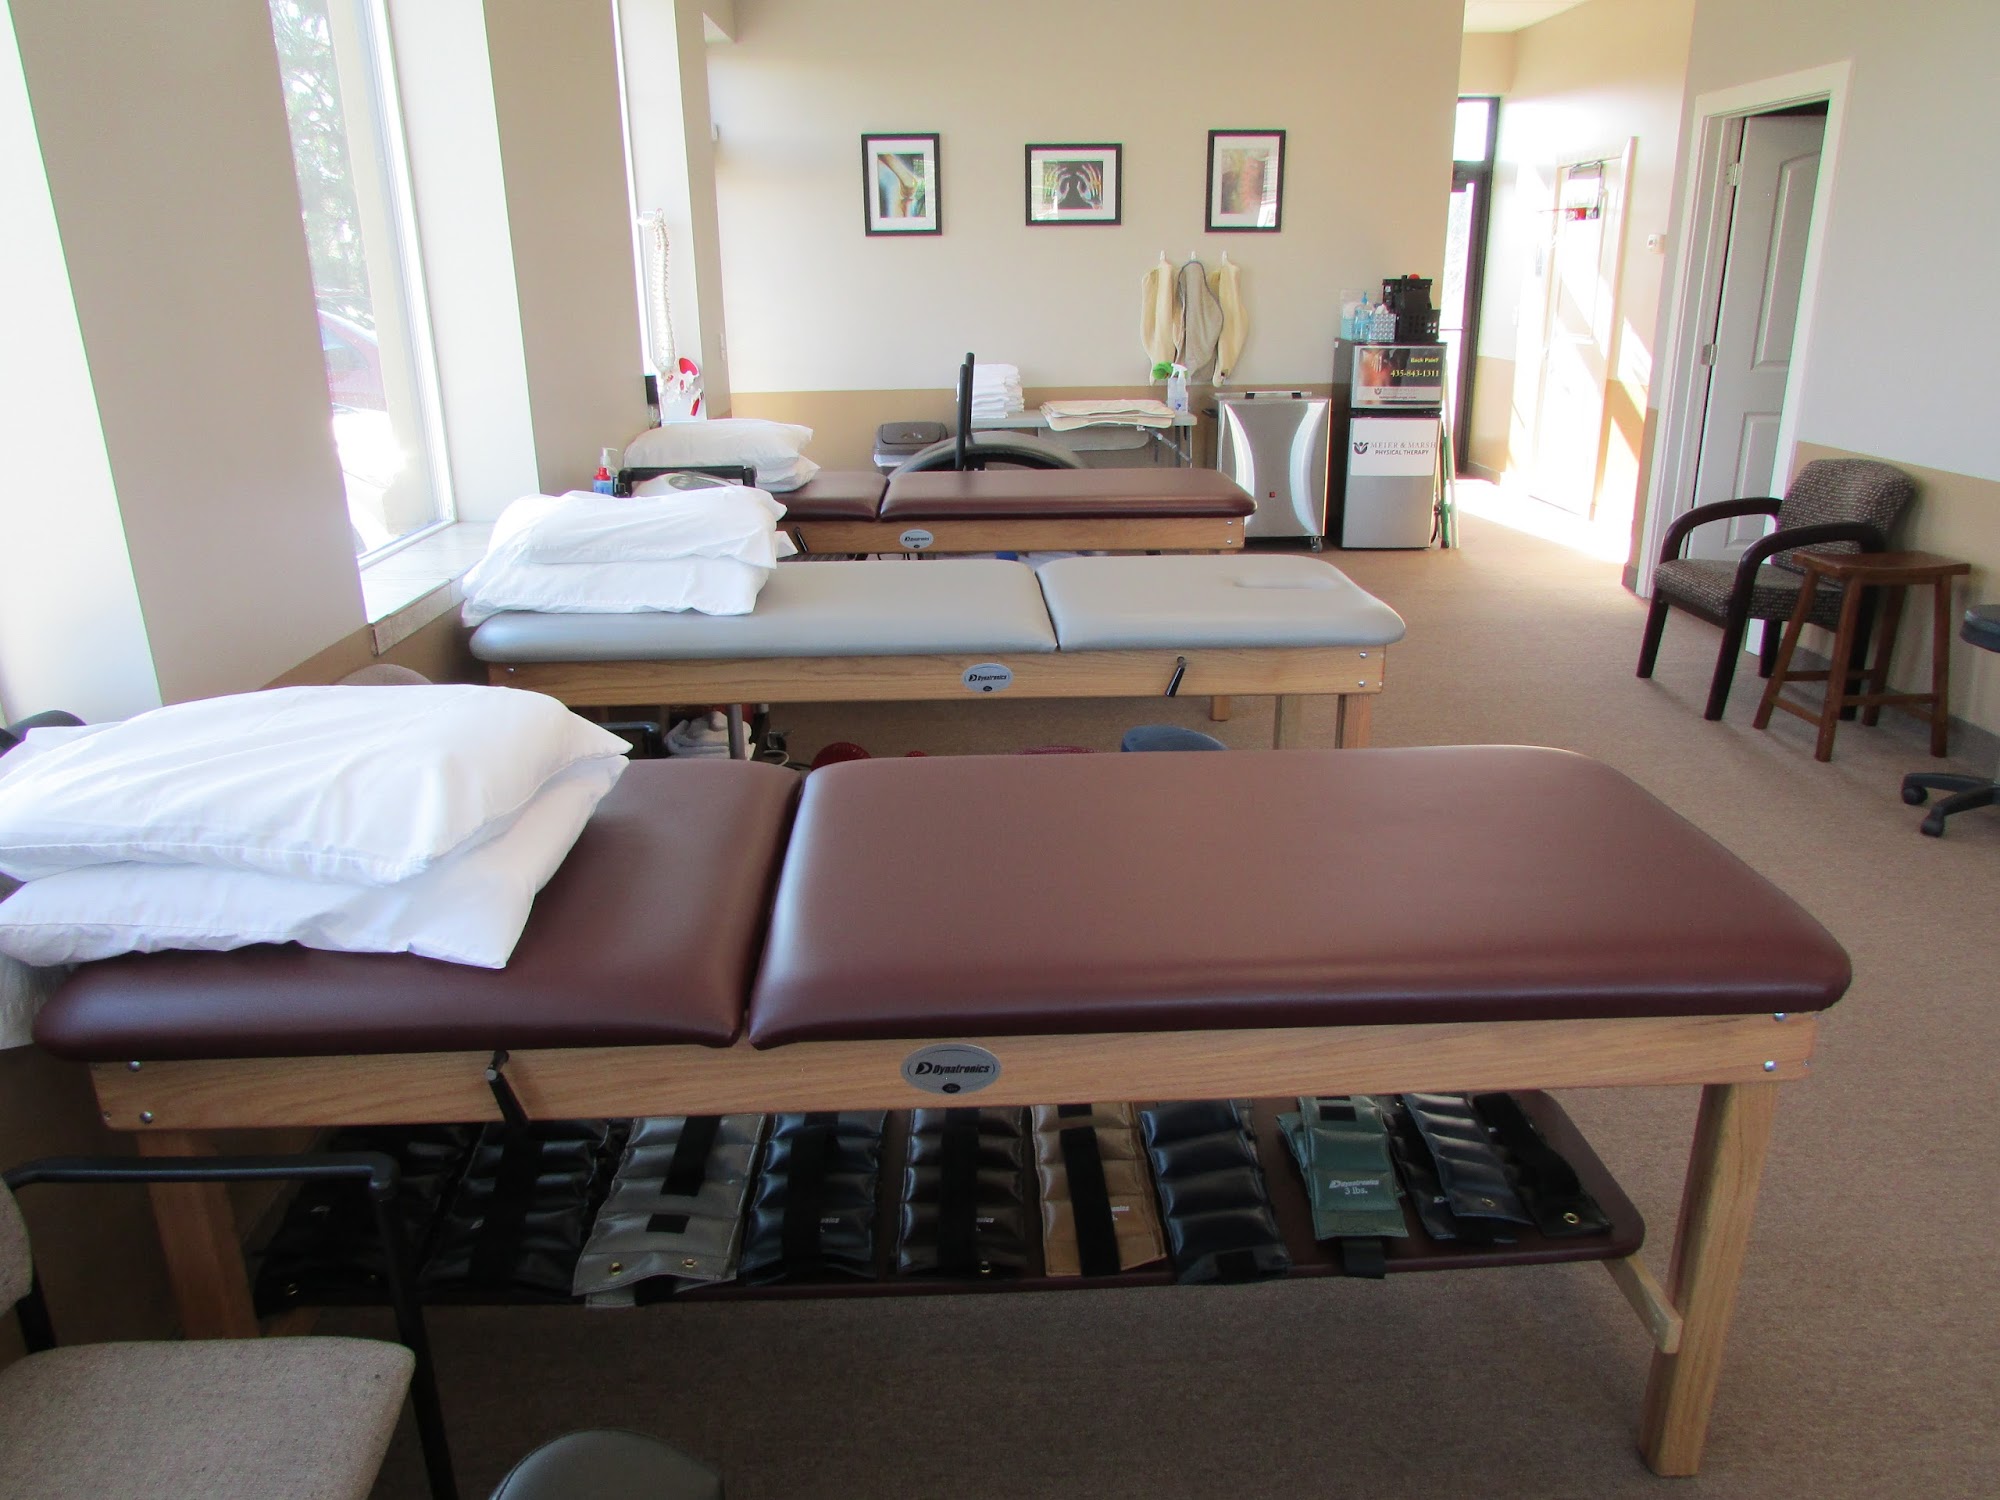 Meier & Marsh Physical Therapy